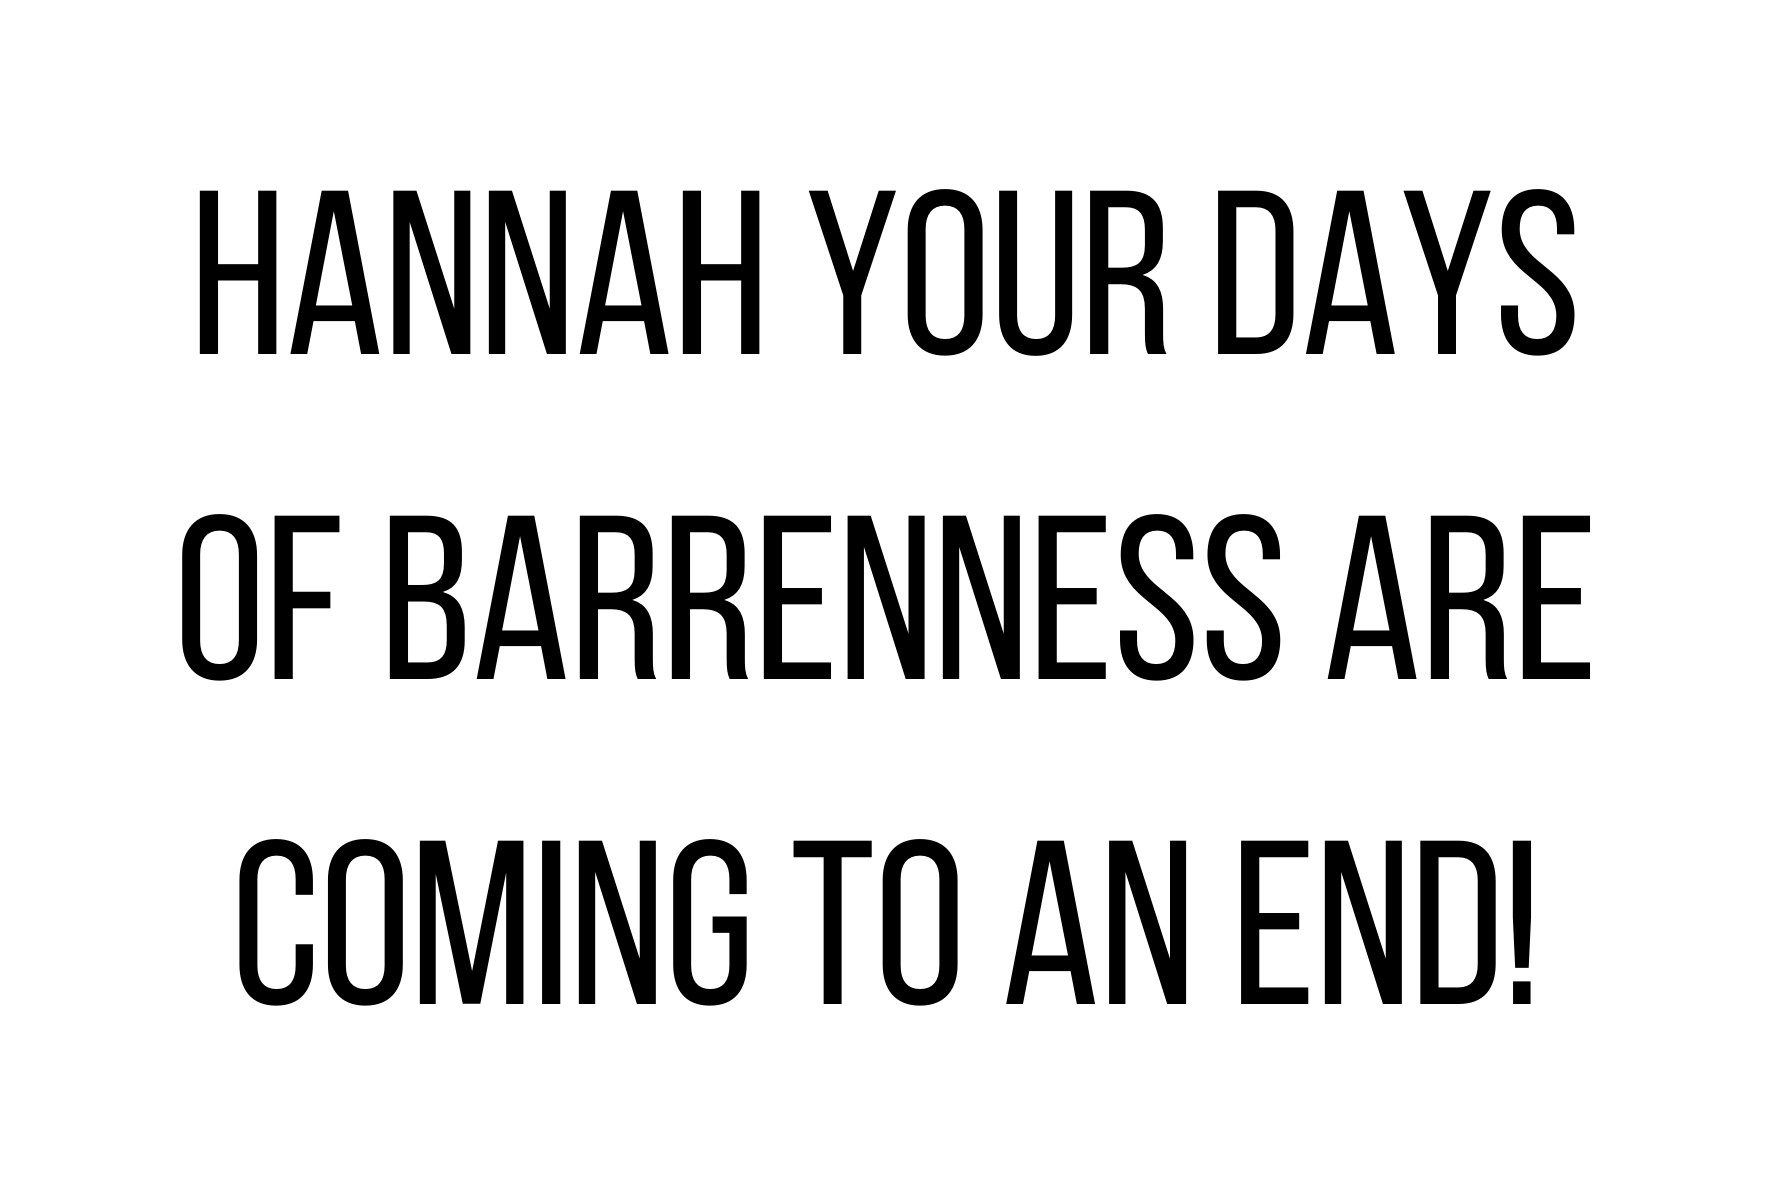 Hannah your days of barrenness